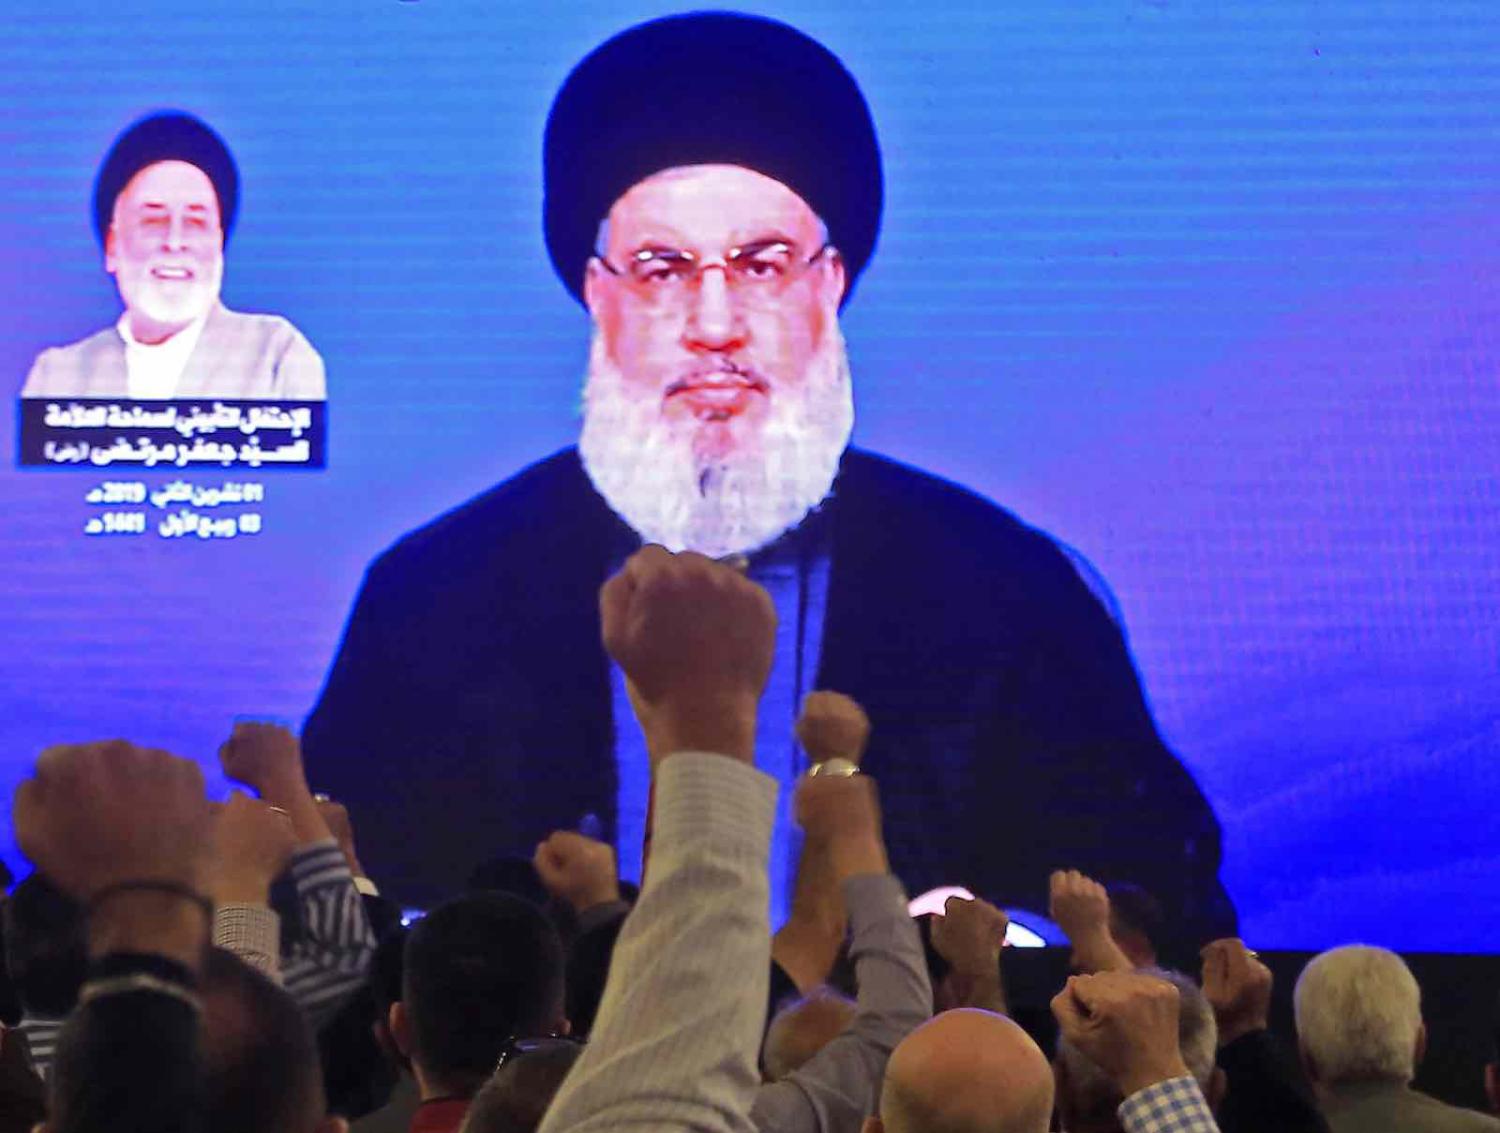 Supporters of Hassan Nasrallah, the head of Lebanon’s militant Hezbollah movement, watch him speak through a giant screen at a mosque in Beirut’s southern suburbs on 1 November (Photo: AFP via Getty Images)